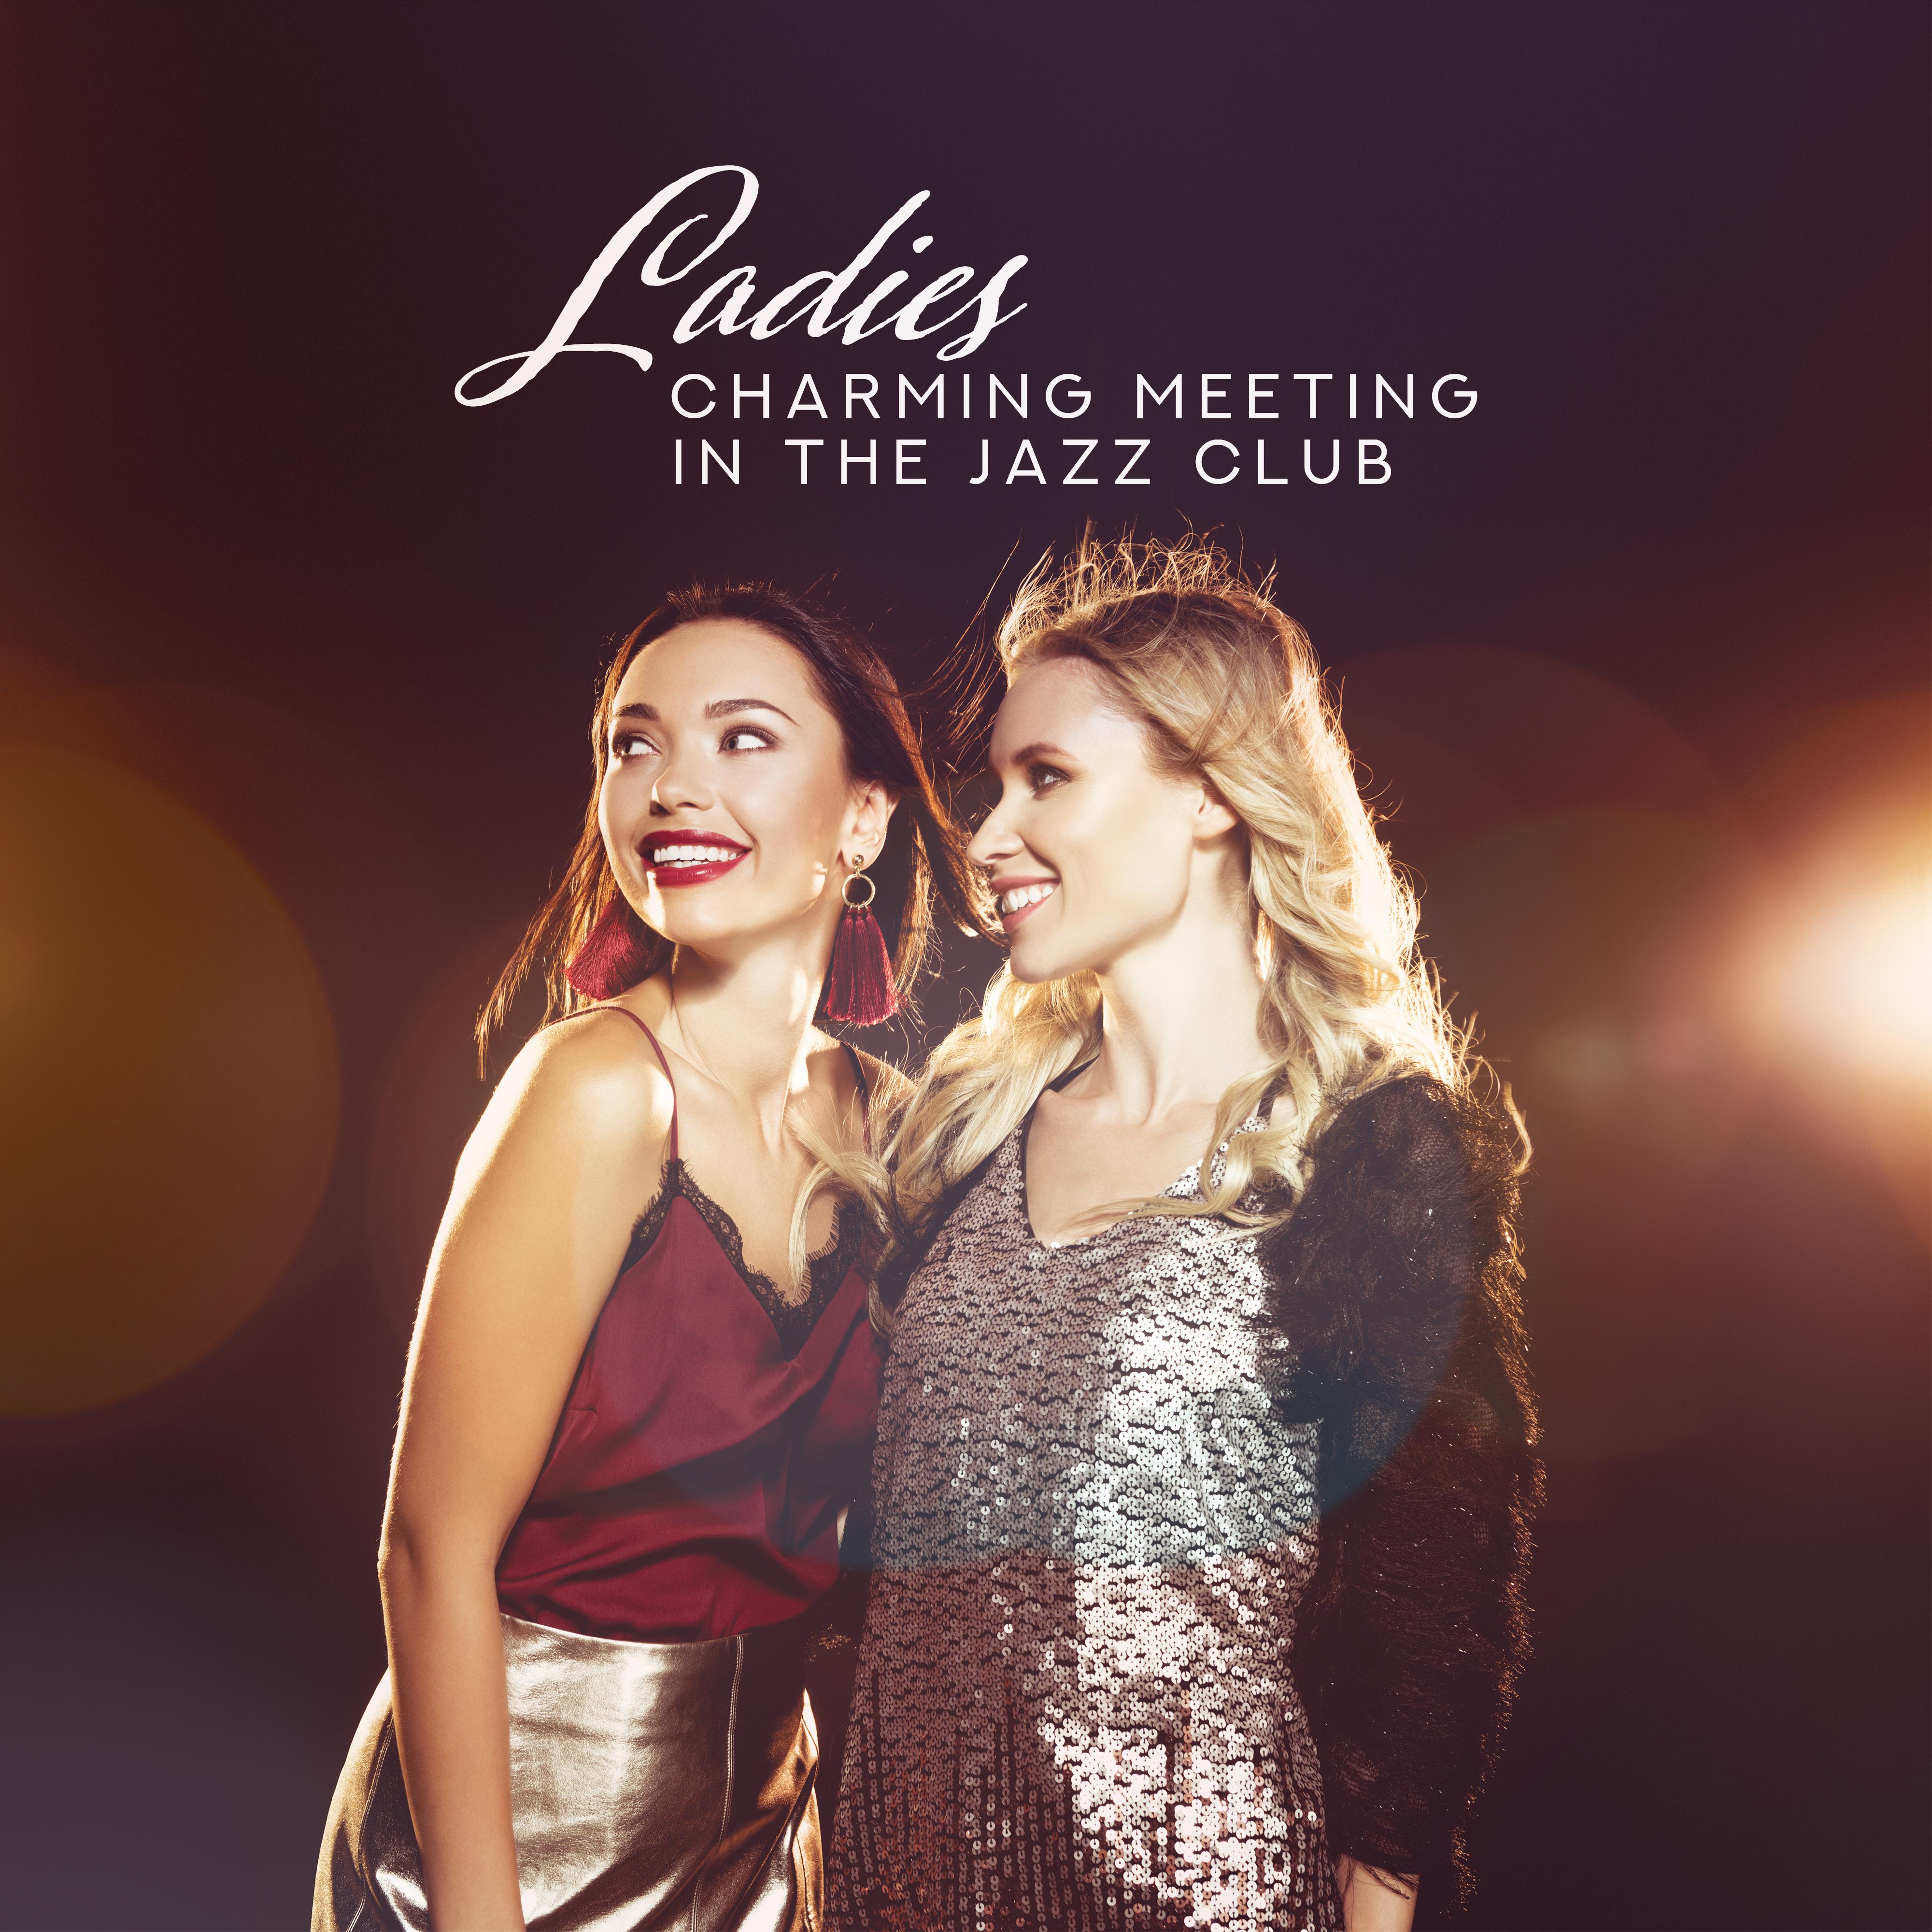 Ladies Charming Meeting in the Jazz Club: 2019 Smooth Instrumental Jazz Collection for Nice Time Spending with Your Friends in the Jazz Club, Ladies Night Swing Dance Party